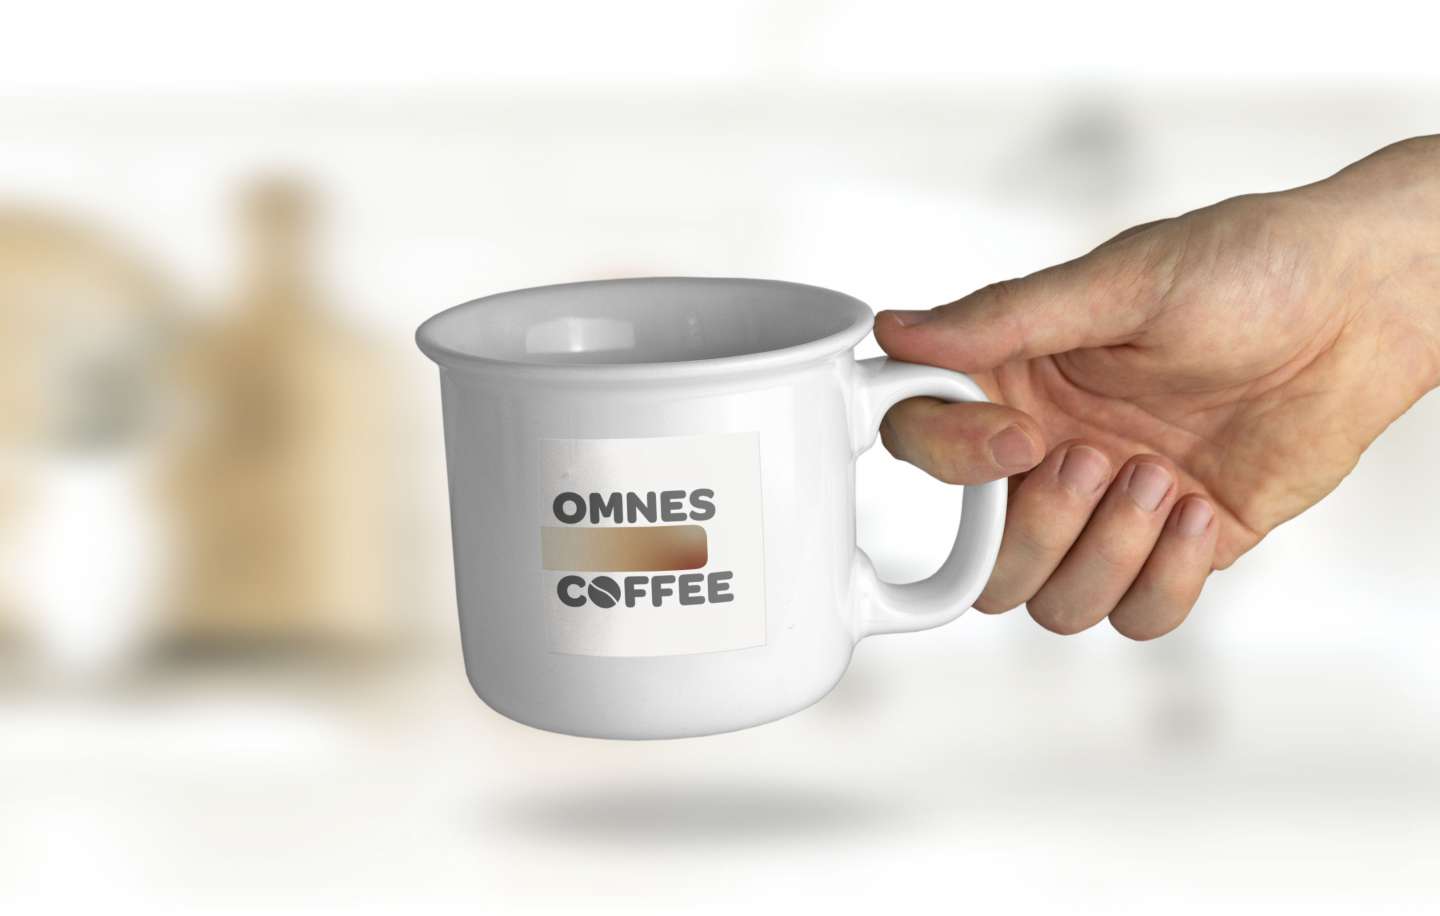 Omnes Coffee